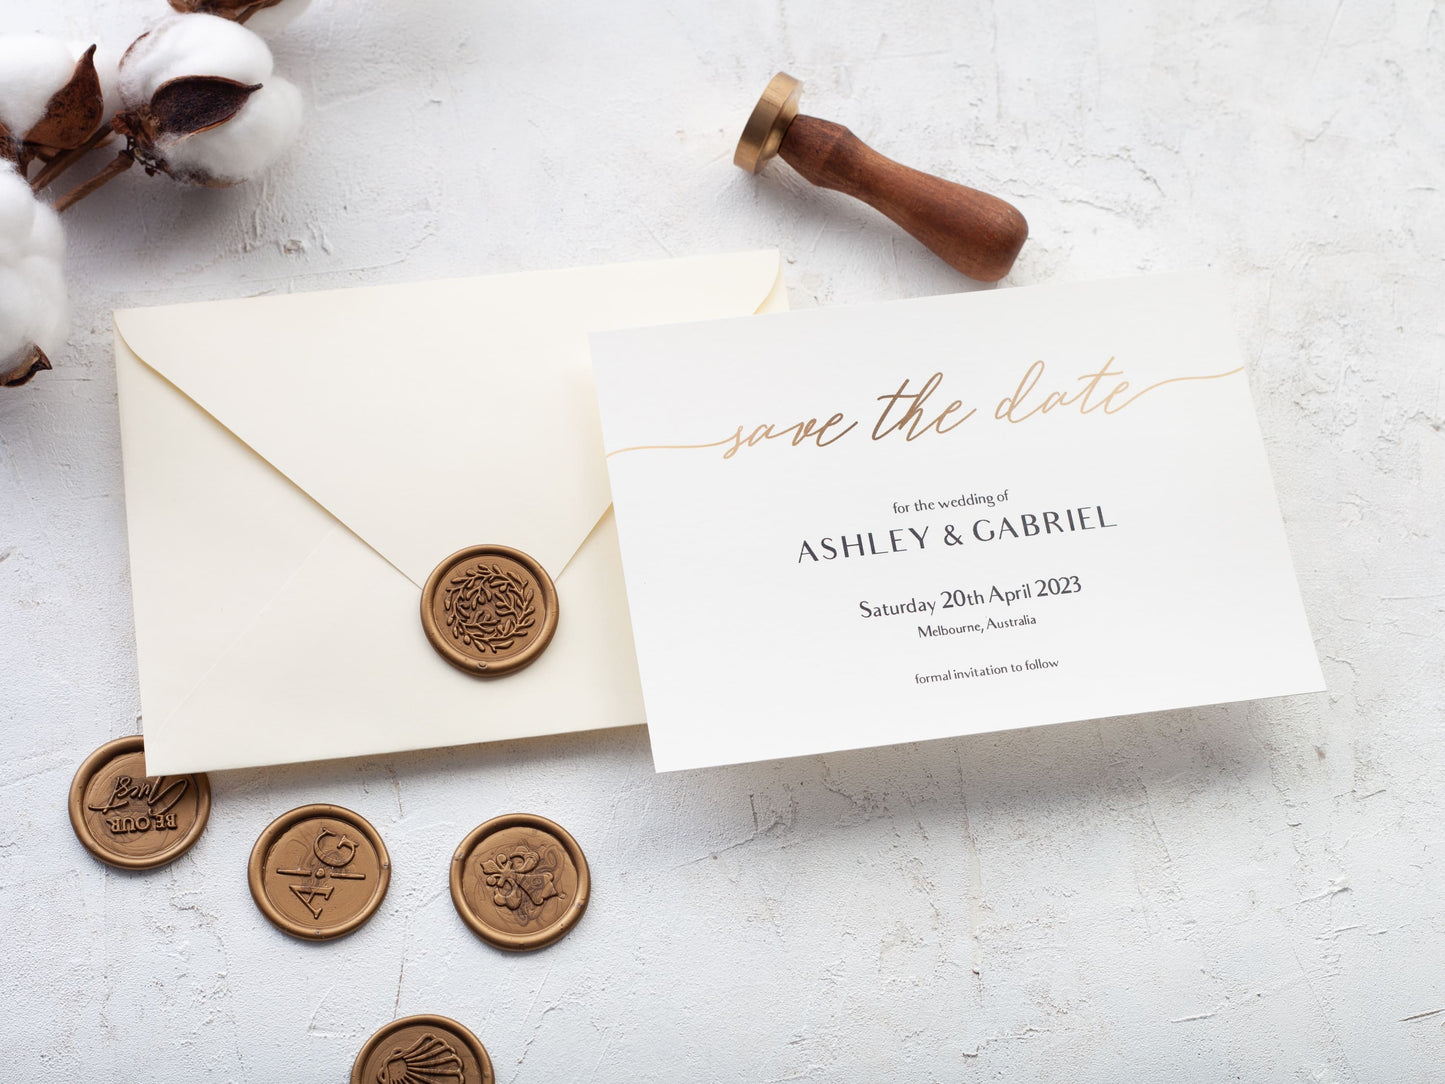 Simple save the date cards with wax seal